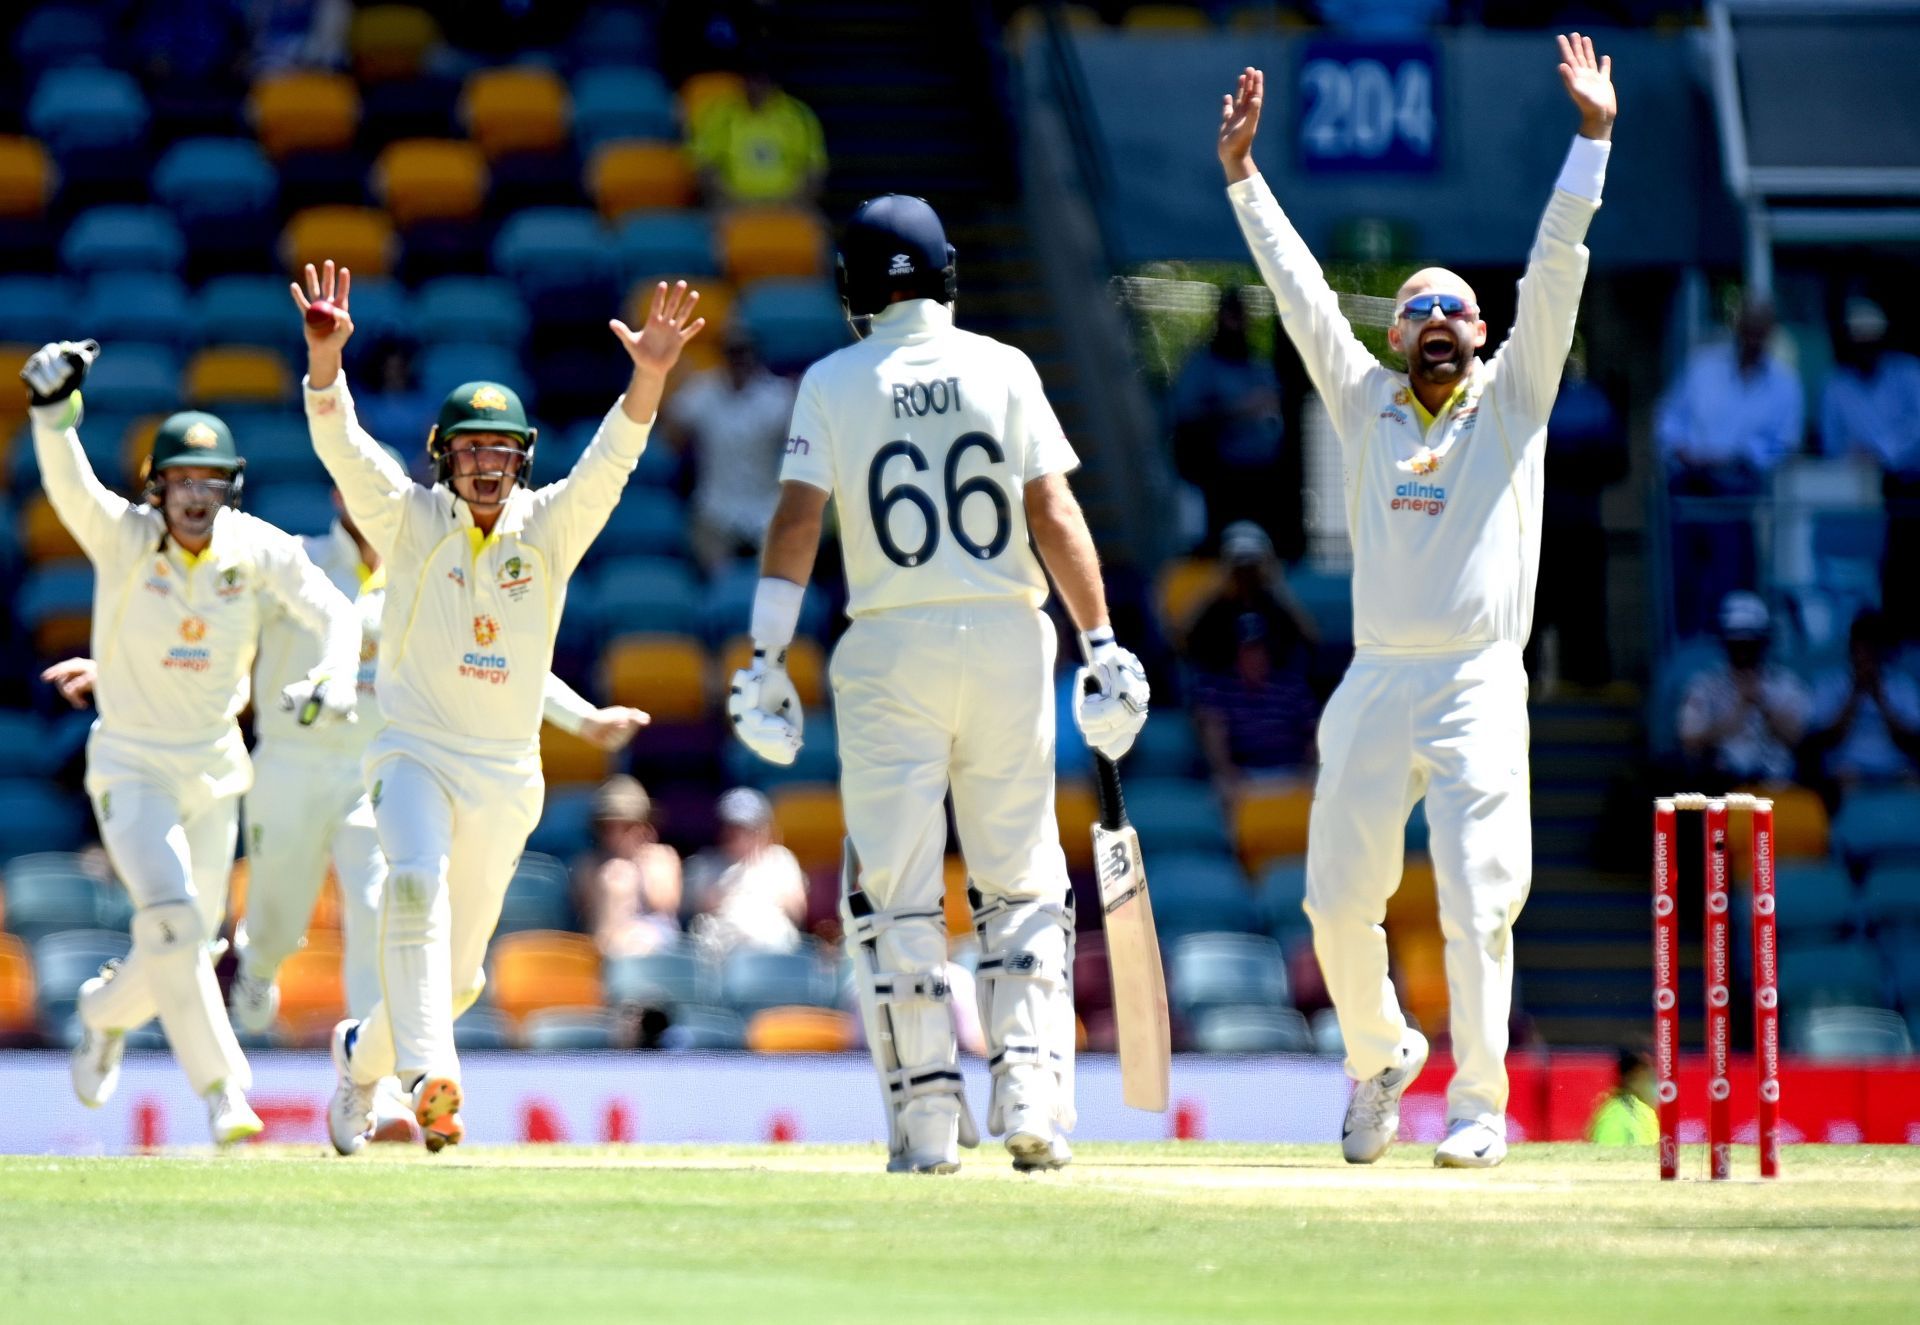 Nathan Lyon picked up his 400th Test wicket in the first Test in Brisbane